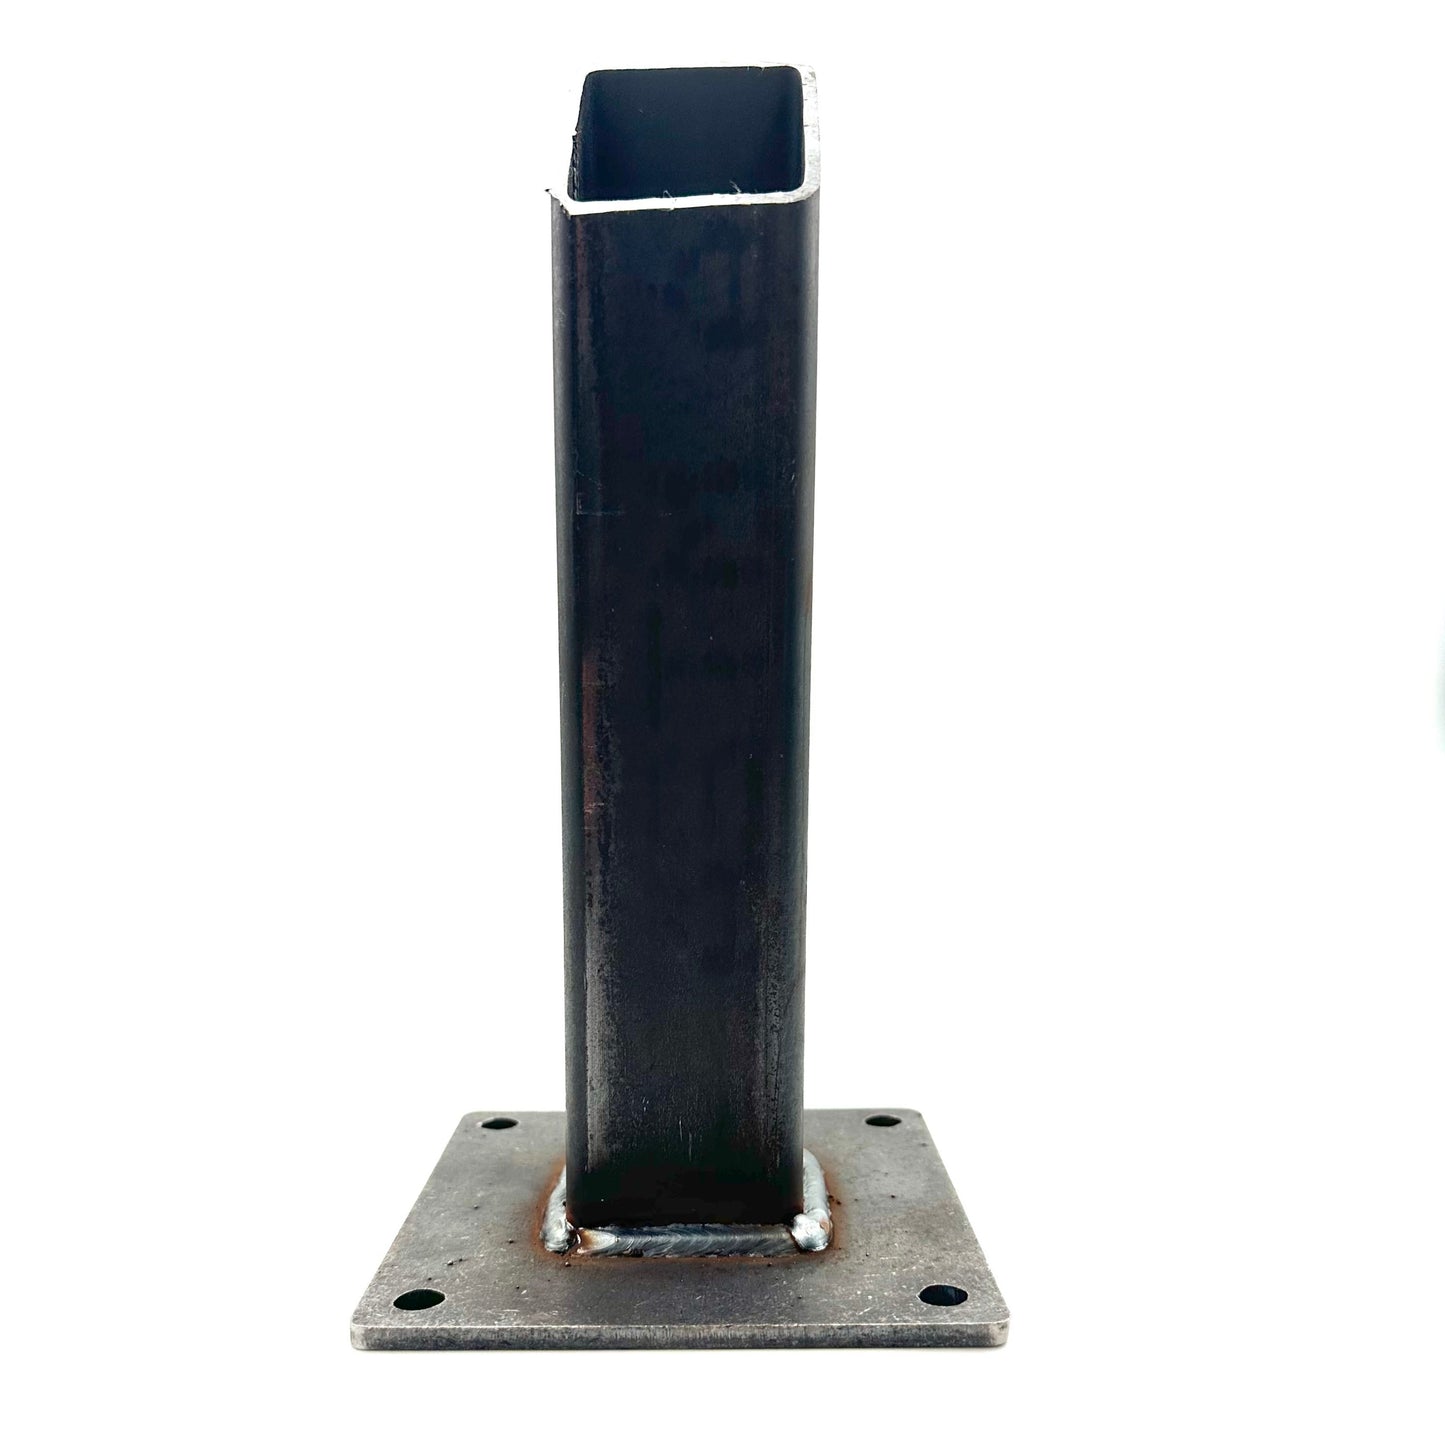 Steel Tubing Welded To Base Plate For Hand Rails